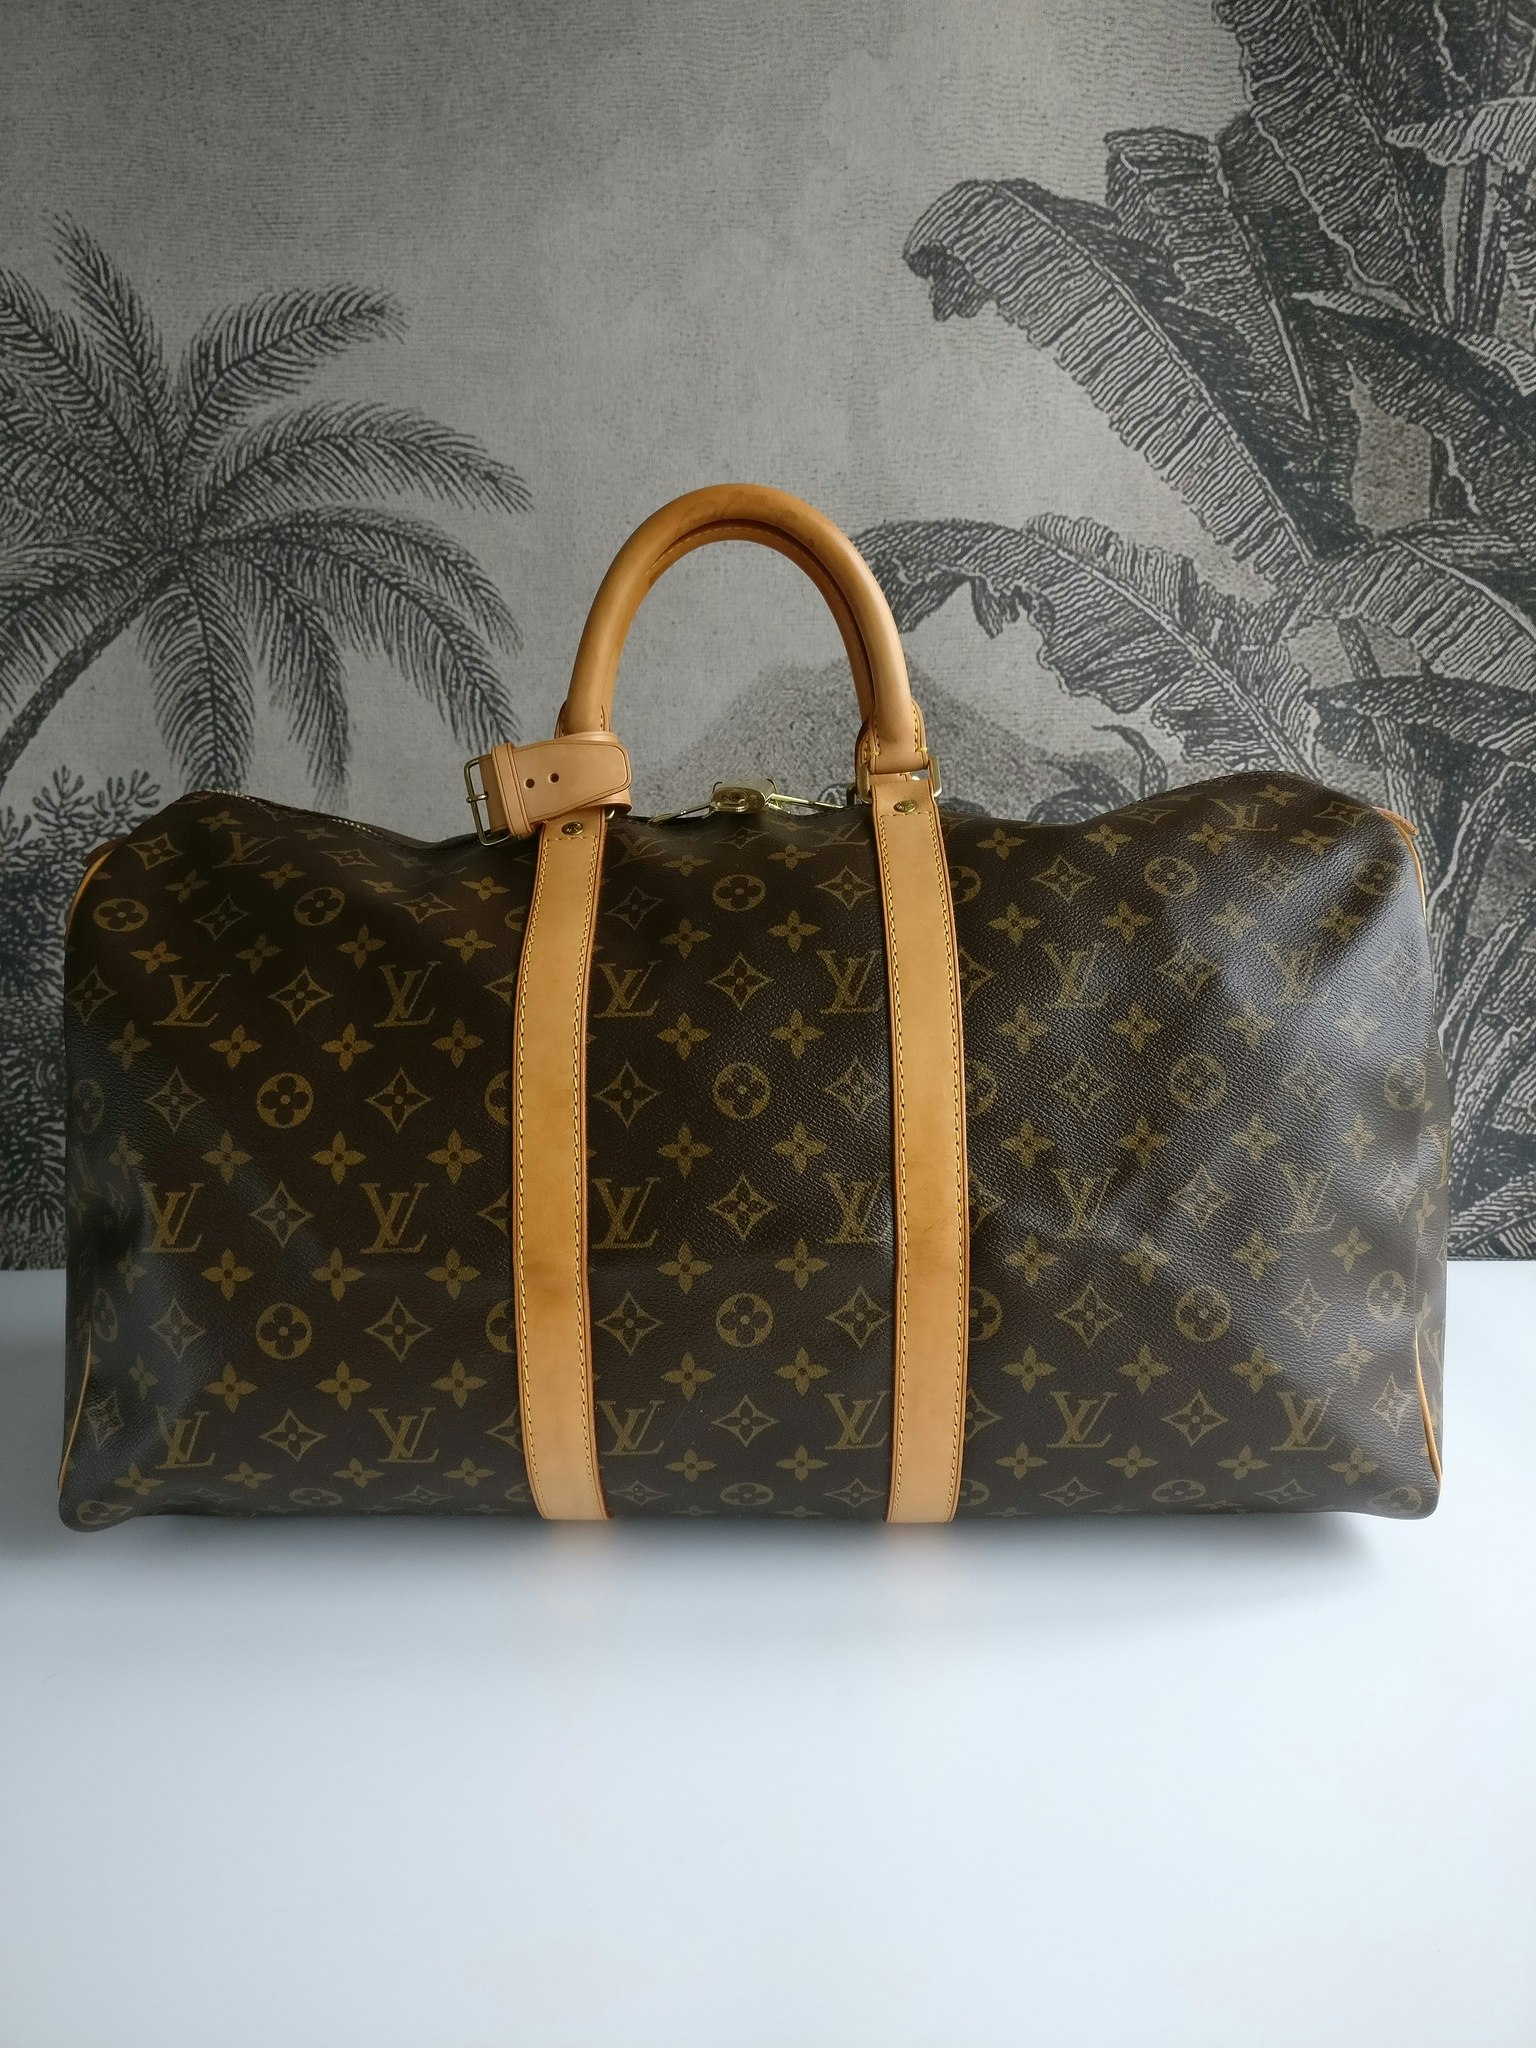 Louis Vuitton Takeoff Keepall 50 Duffle Bag Khaki. Available In Brand New  Condition. Made in France 🇫🇷 . $4500 𝐒𝐡𝐢𝐩𝐩𝐞𝐝 𝐒𝐚𝐥